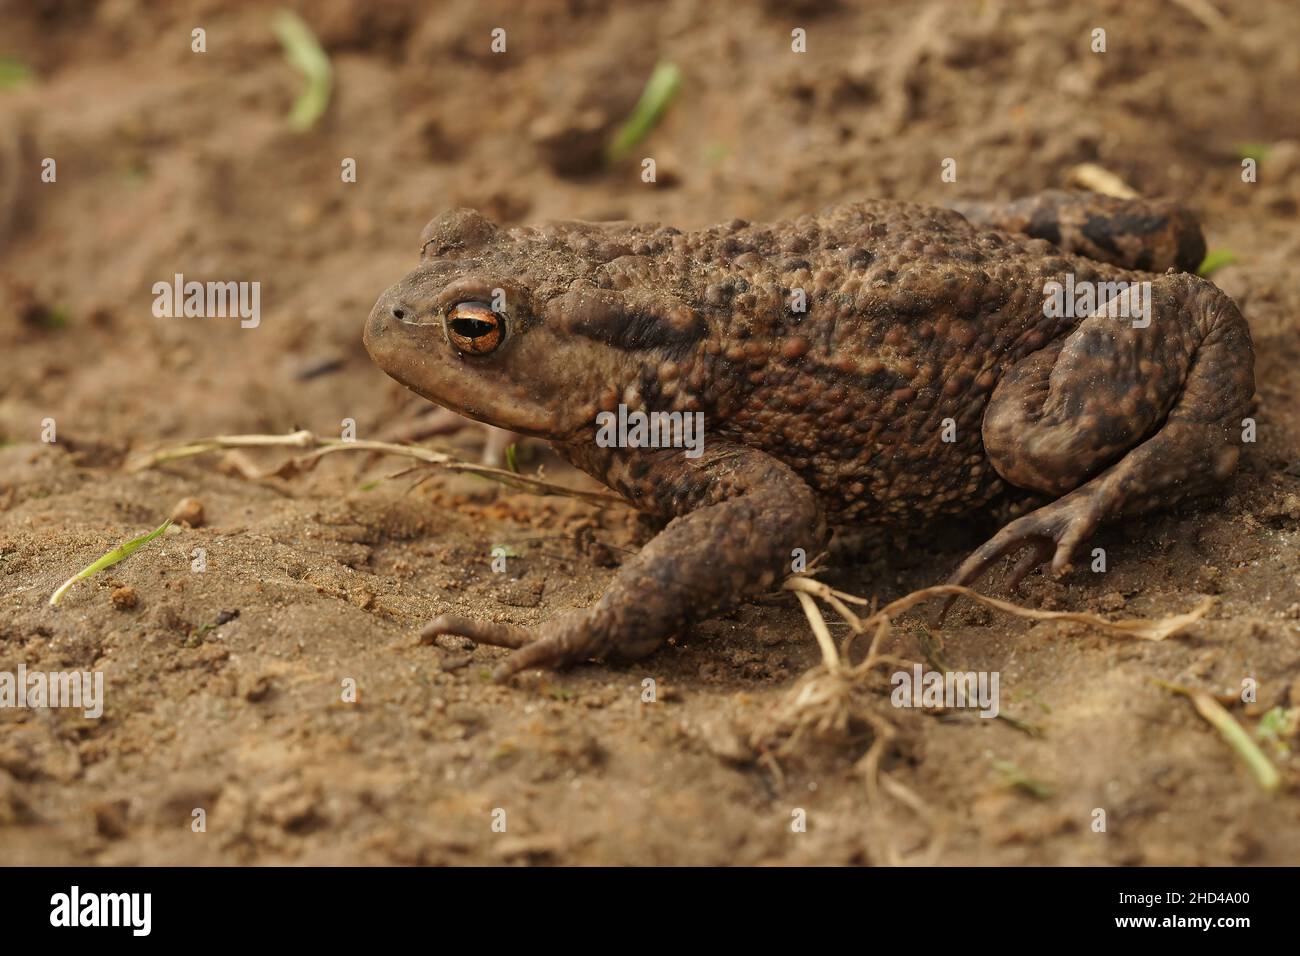 Closeup on a female European common toad, Bufo bufo, sitting on the ground in the garden Stock Photo